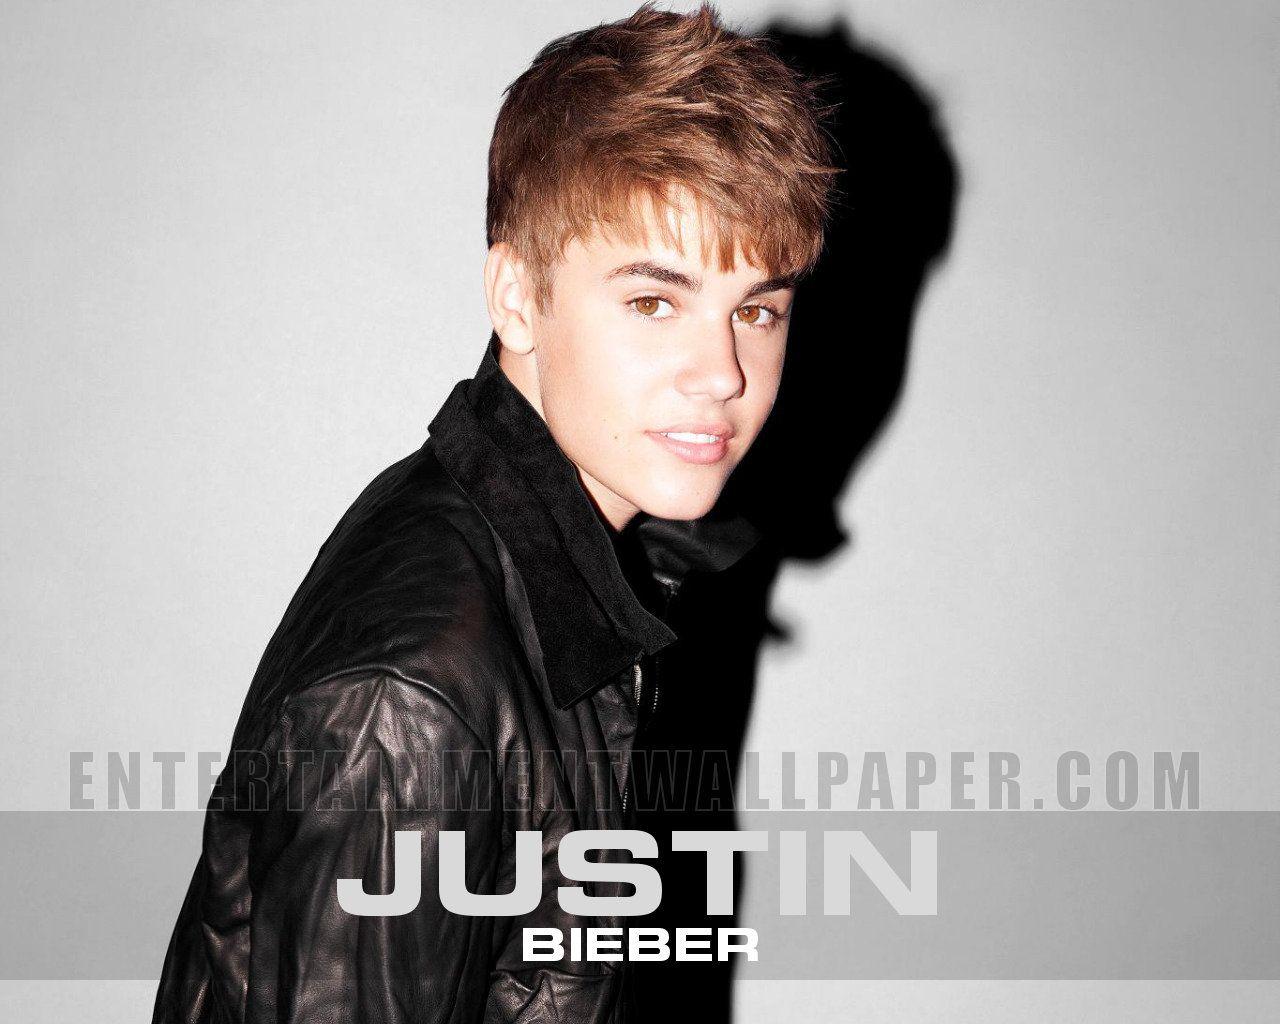 Justin Bieber image biebs HD wallpaper and background photo